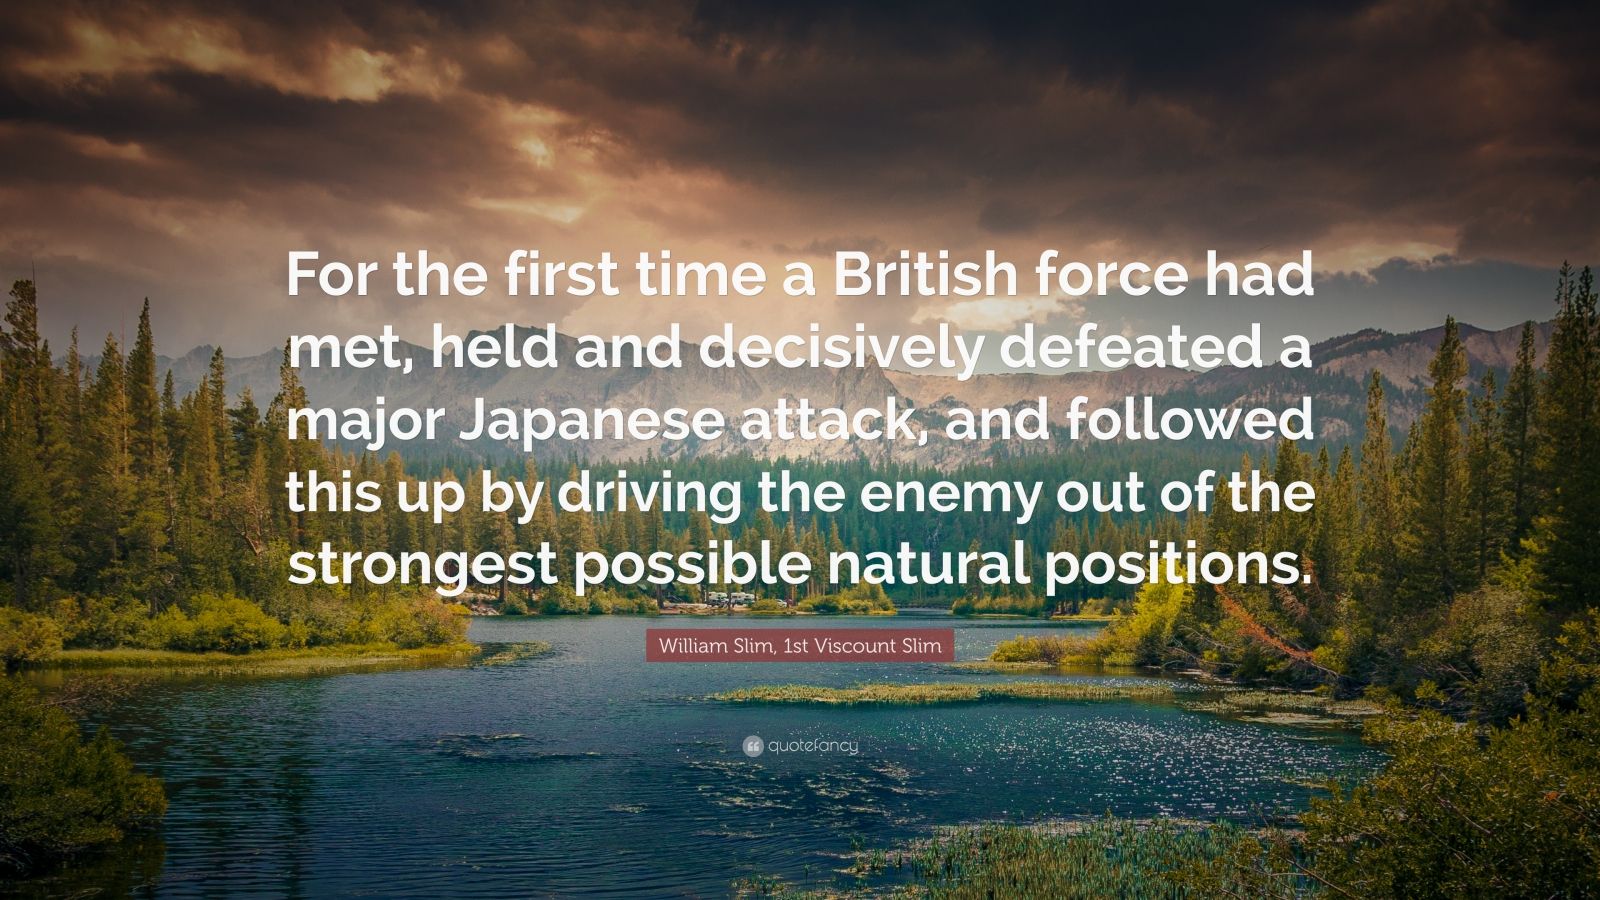 William Slim, 1st Viscount Slim Quote: “For the first time a British ...